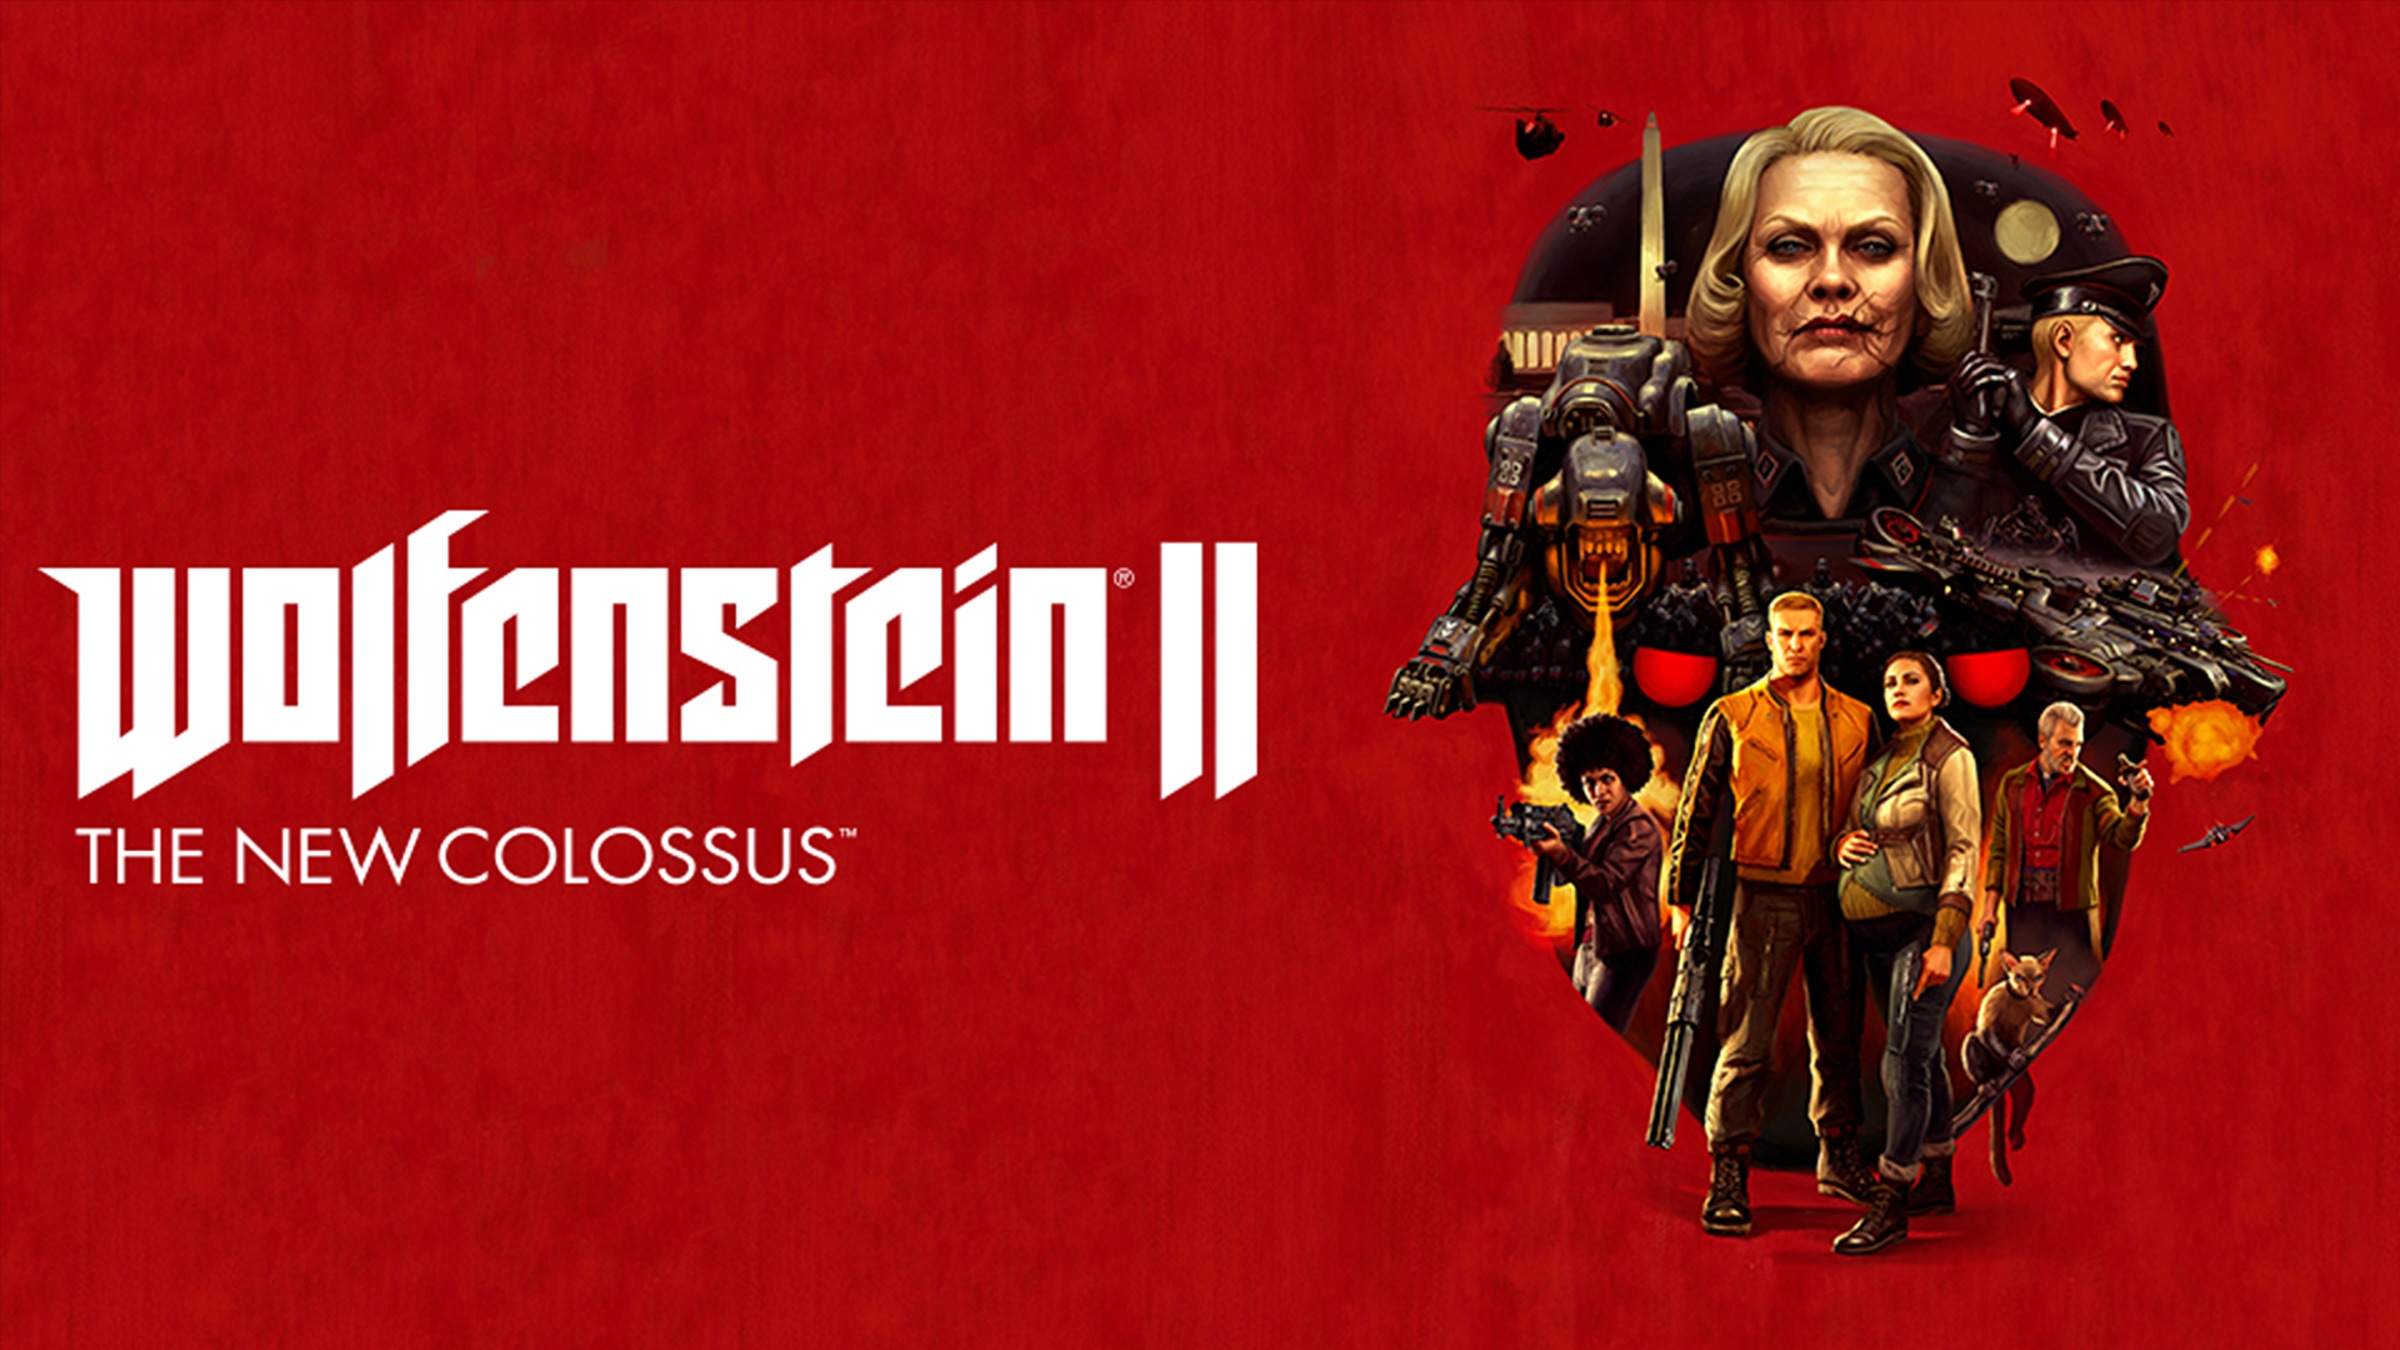 Afledning Betydelig redaktionelle Wolfenstein II®: The New Colossus™ for Nintendo Switch - Nintendo Official  Site